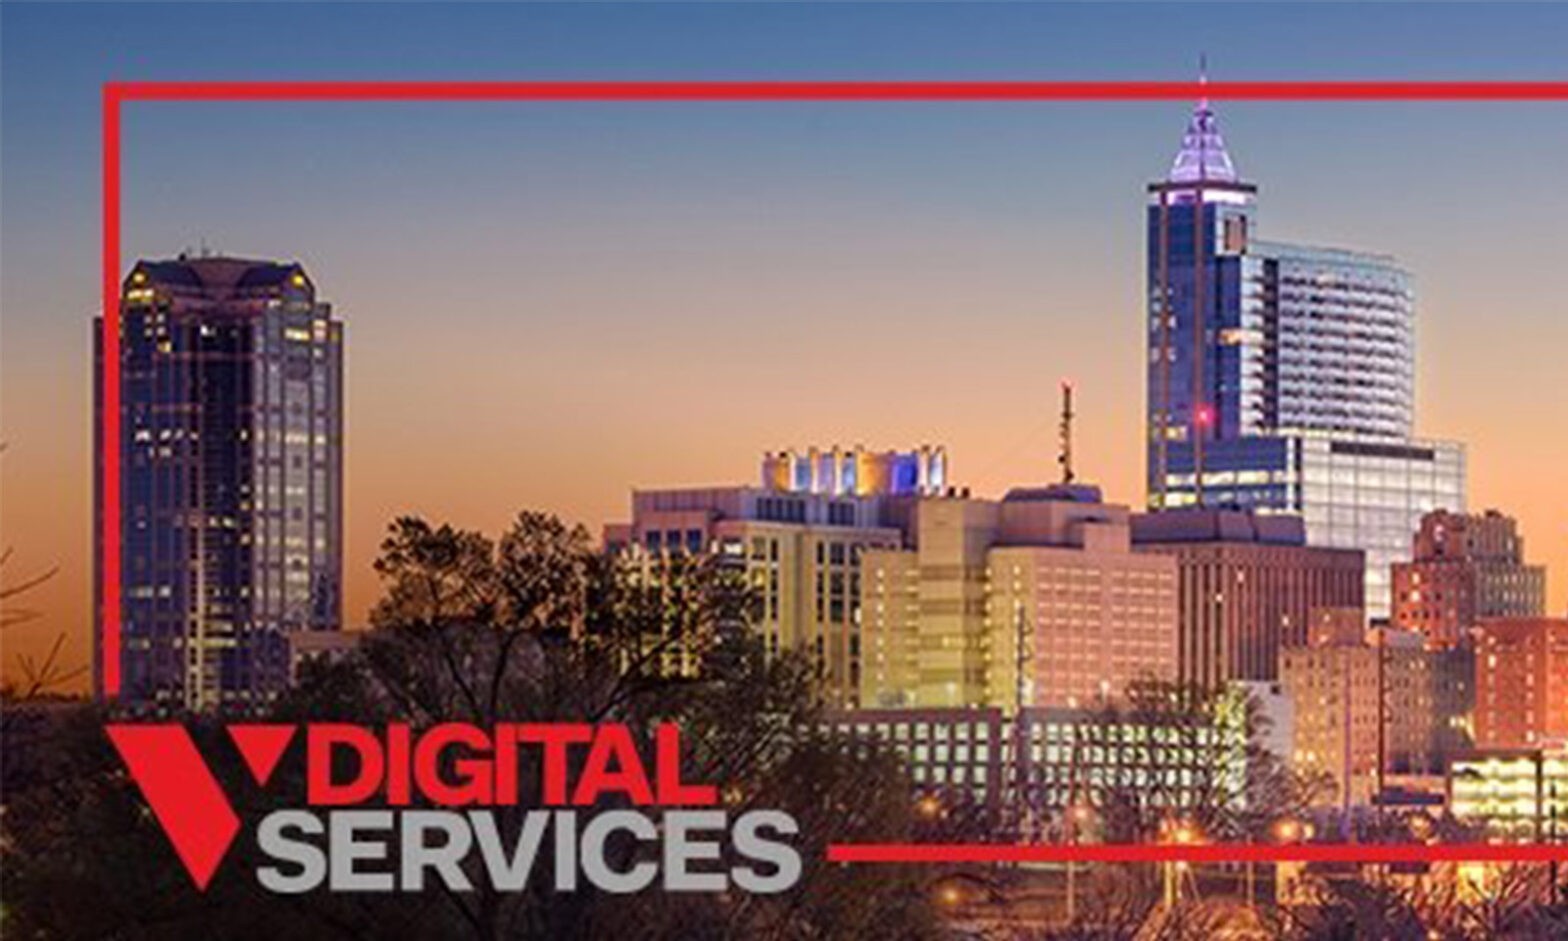 V DIGITAL SERVICES OPENS A GATEWAY TO THE AMERICAN SOUTHEAST. Blog Post